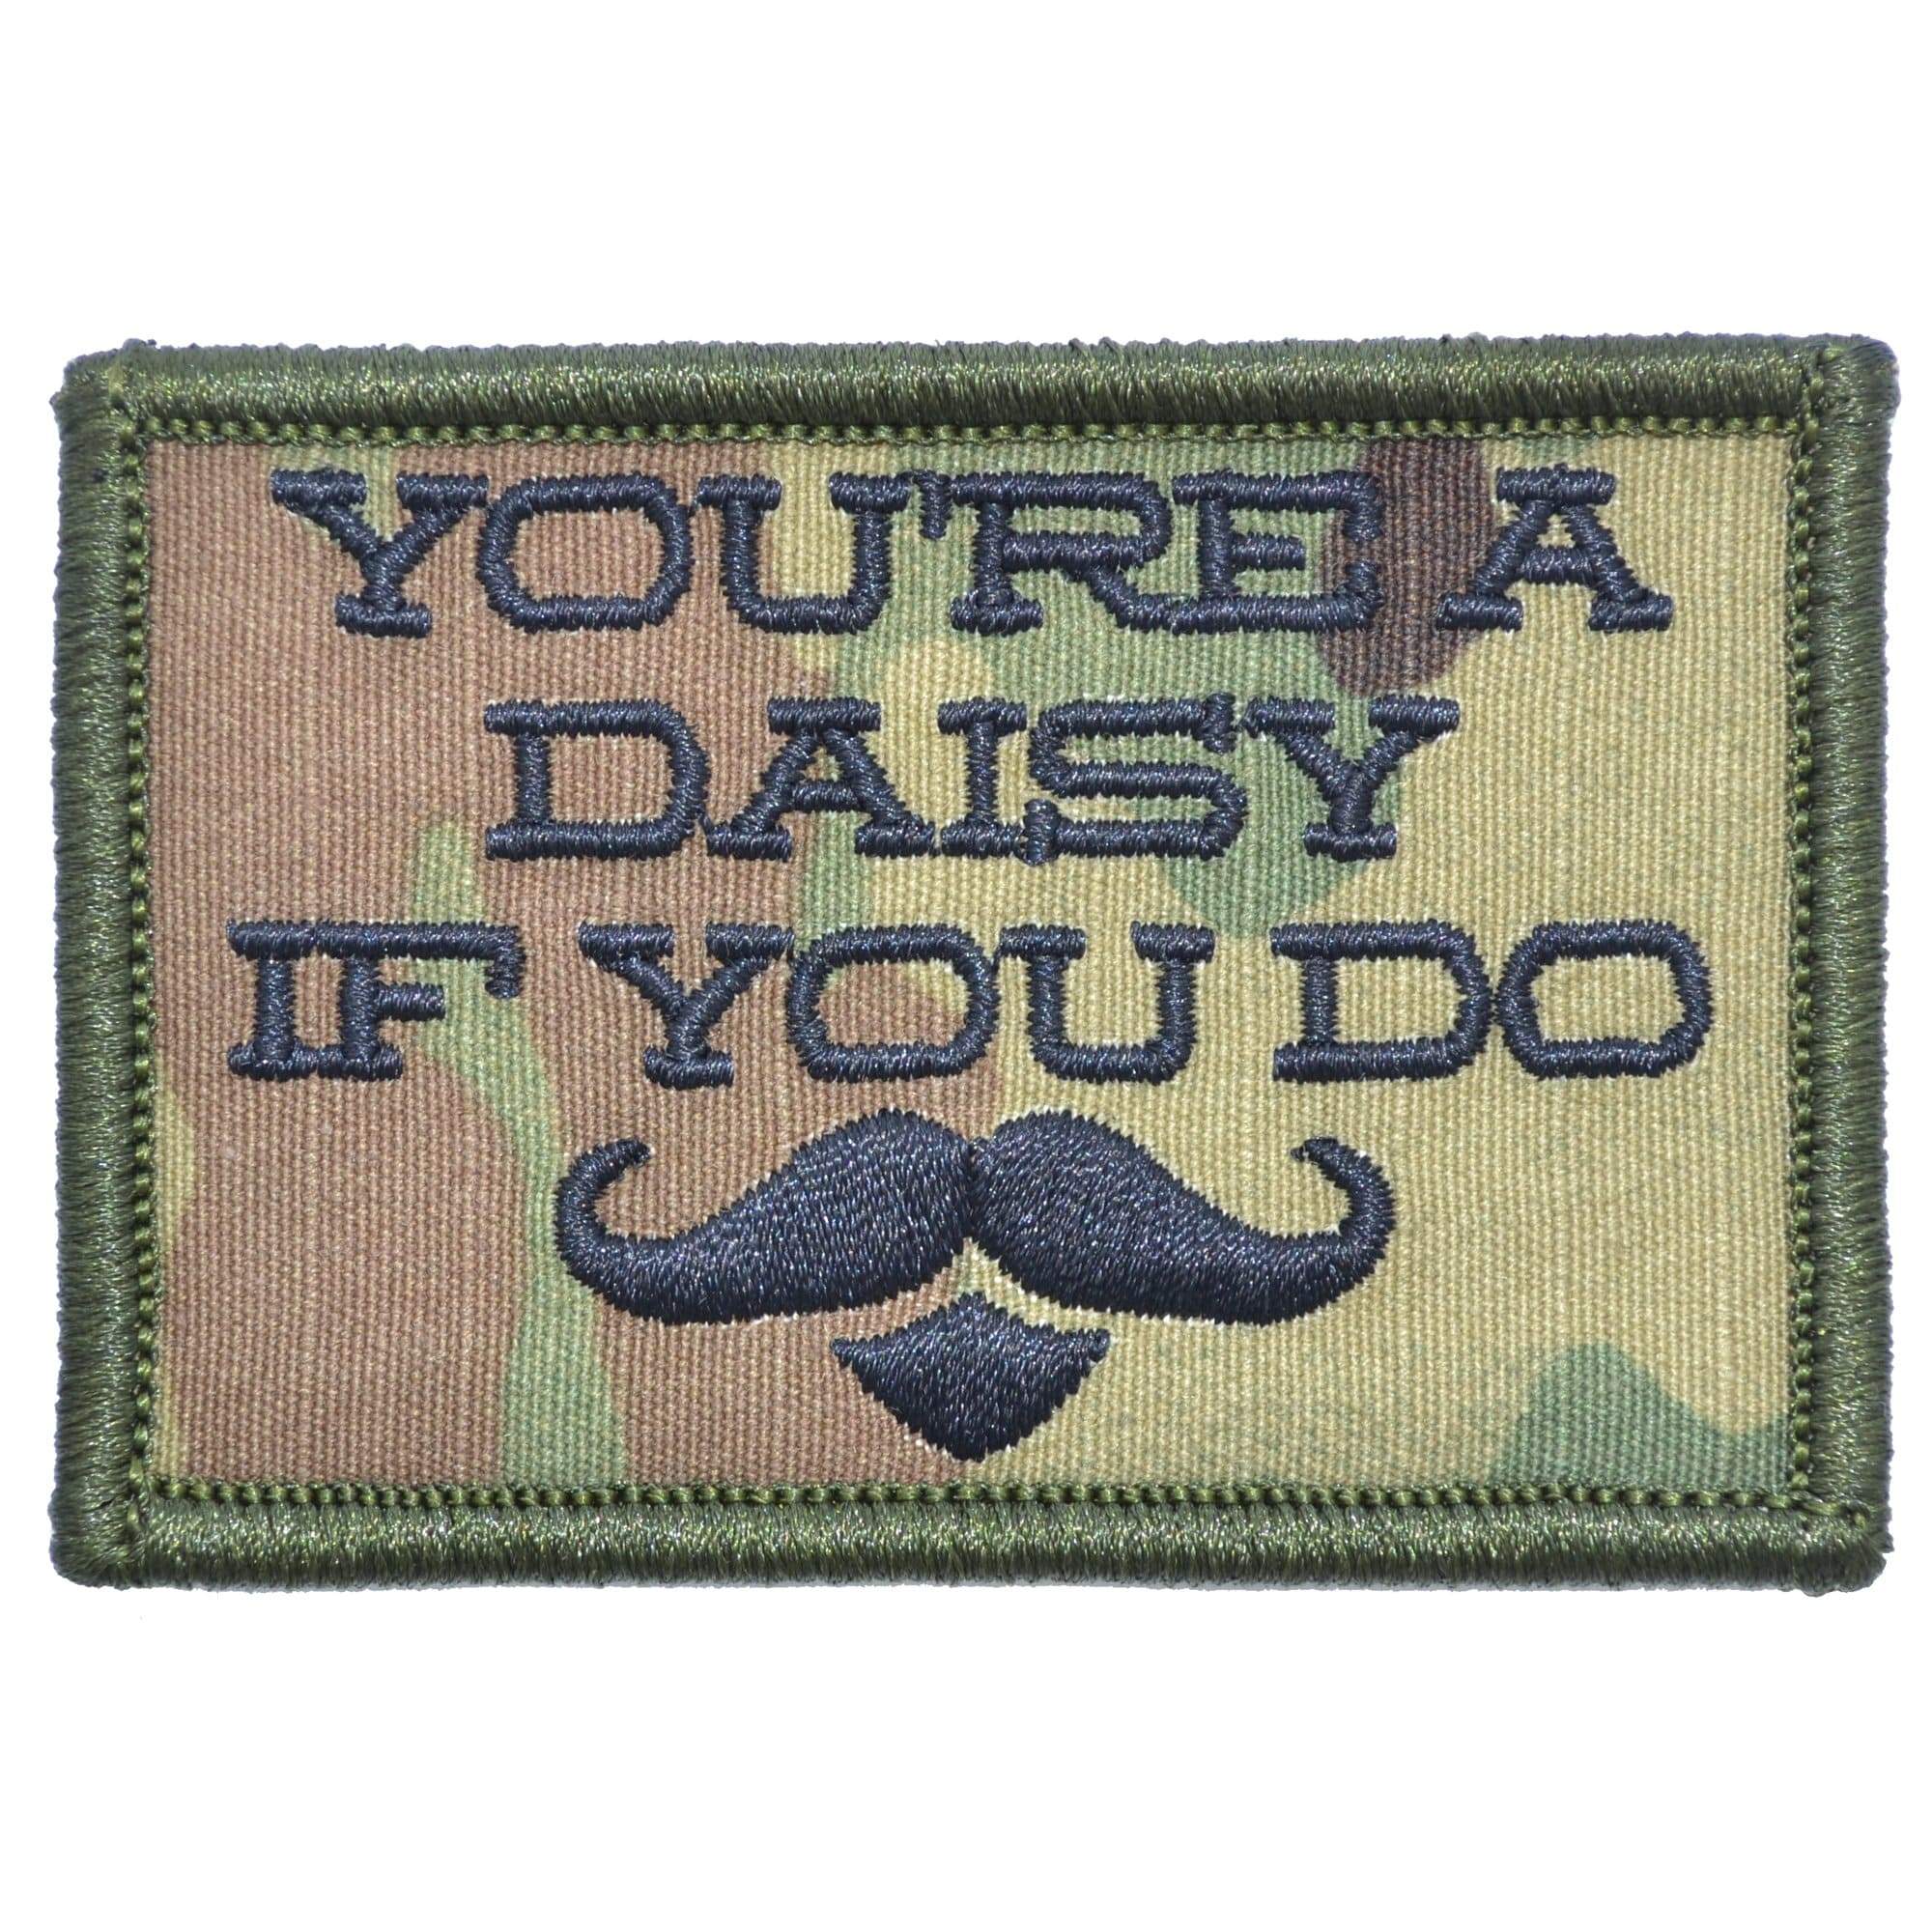 Tactical Gear Junkie Patches MultiCam You're A Daisy If You Do, Doc Holiday Quote - 2x3 Patch